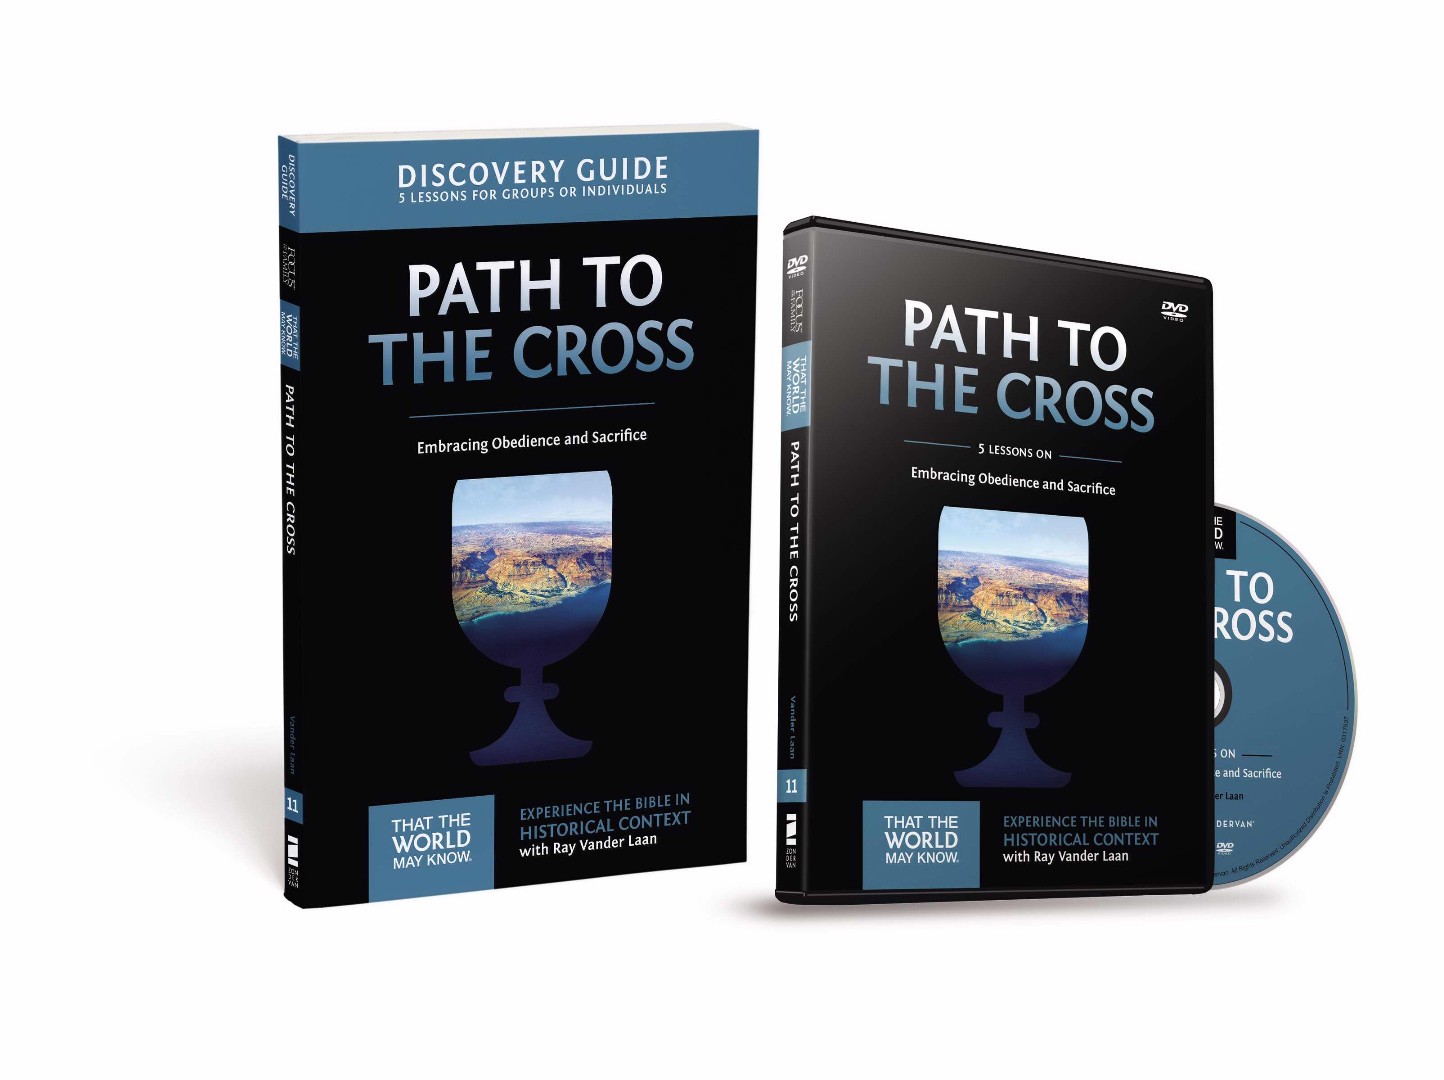 The Path to the Cross Discovery Guide & DVD by Ray Vander Laan at Eden